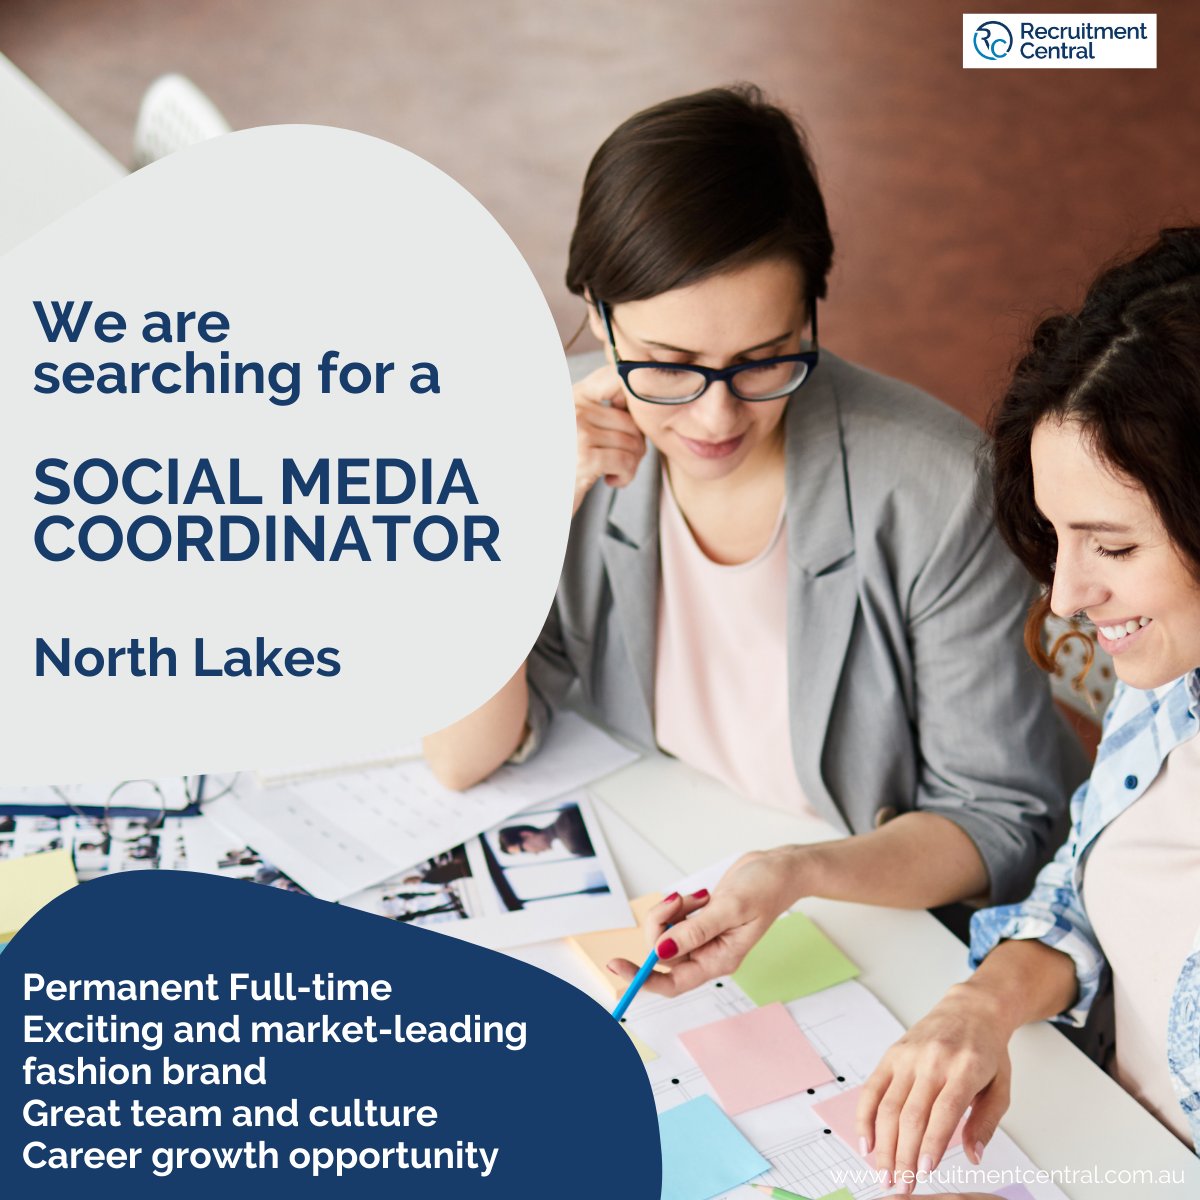 Are you ready to take your social media skills to the next level?  Join an exciting fashion brand as a Fun and Creative Social Media Coordinator with expertise in data analytics. 
Read more here: bit.ly/3NuQ8xh
#recruitmentcentral #SocialMedia #Marketing #FashionRetail